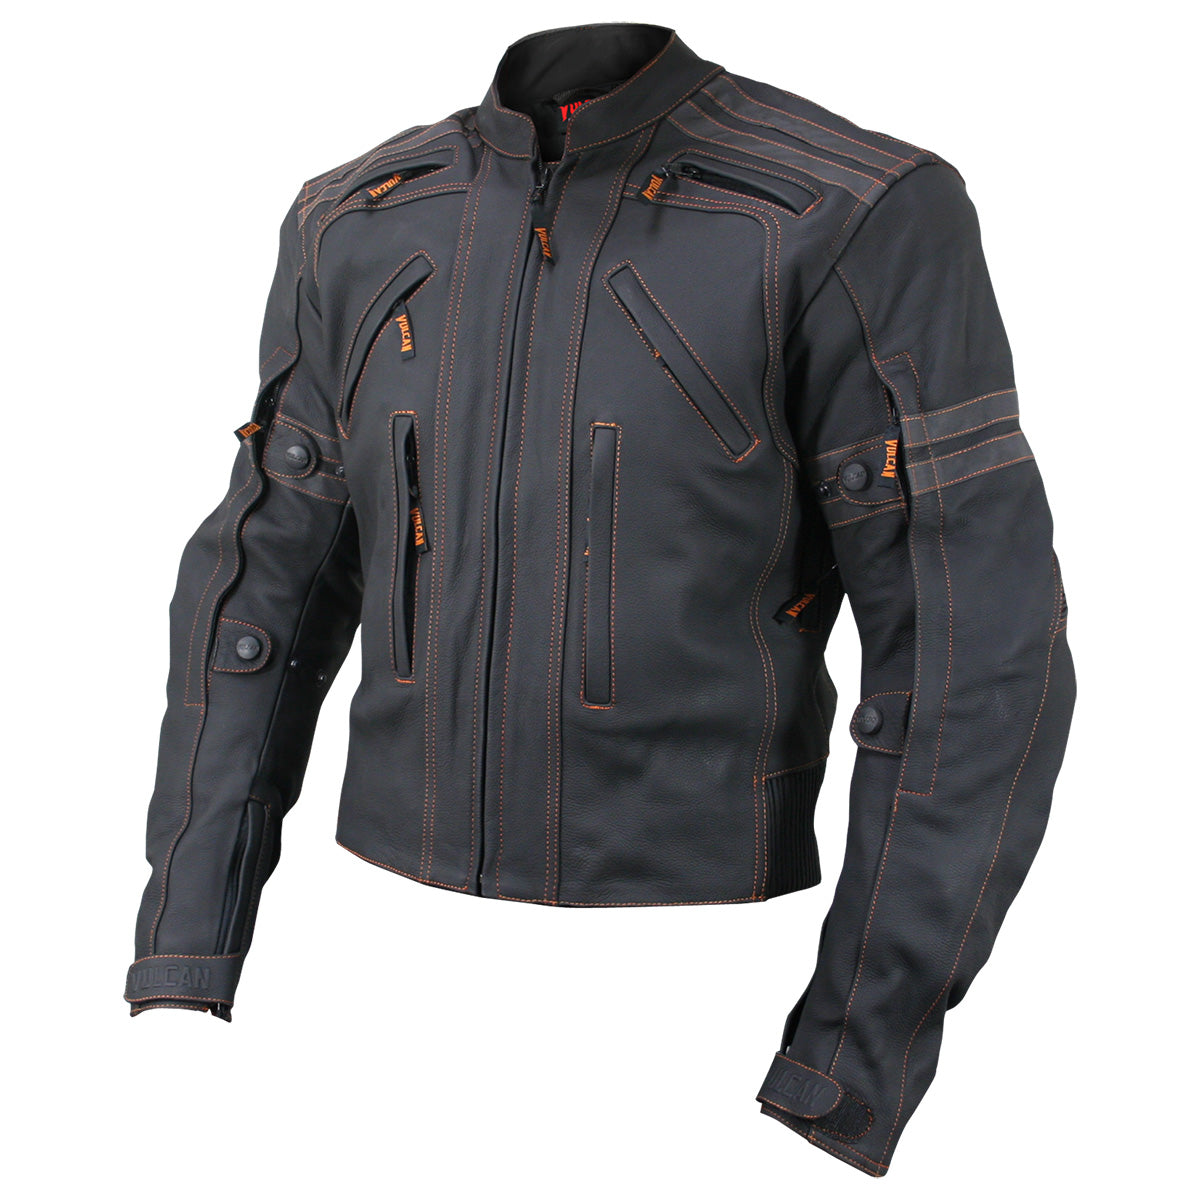 Vulcan VTZ910 Men's Matte Black 'Street' Motorcycle Leather Protective Jacket with CE Armor